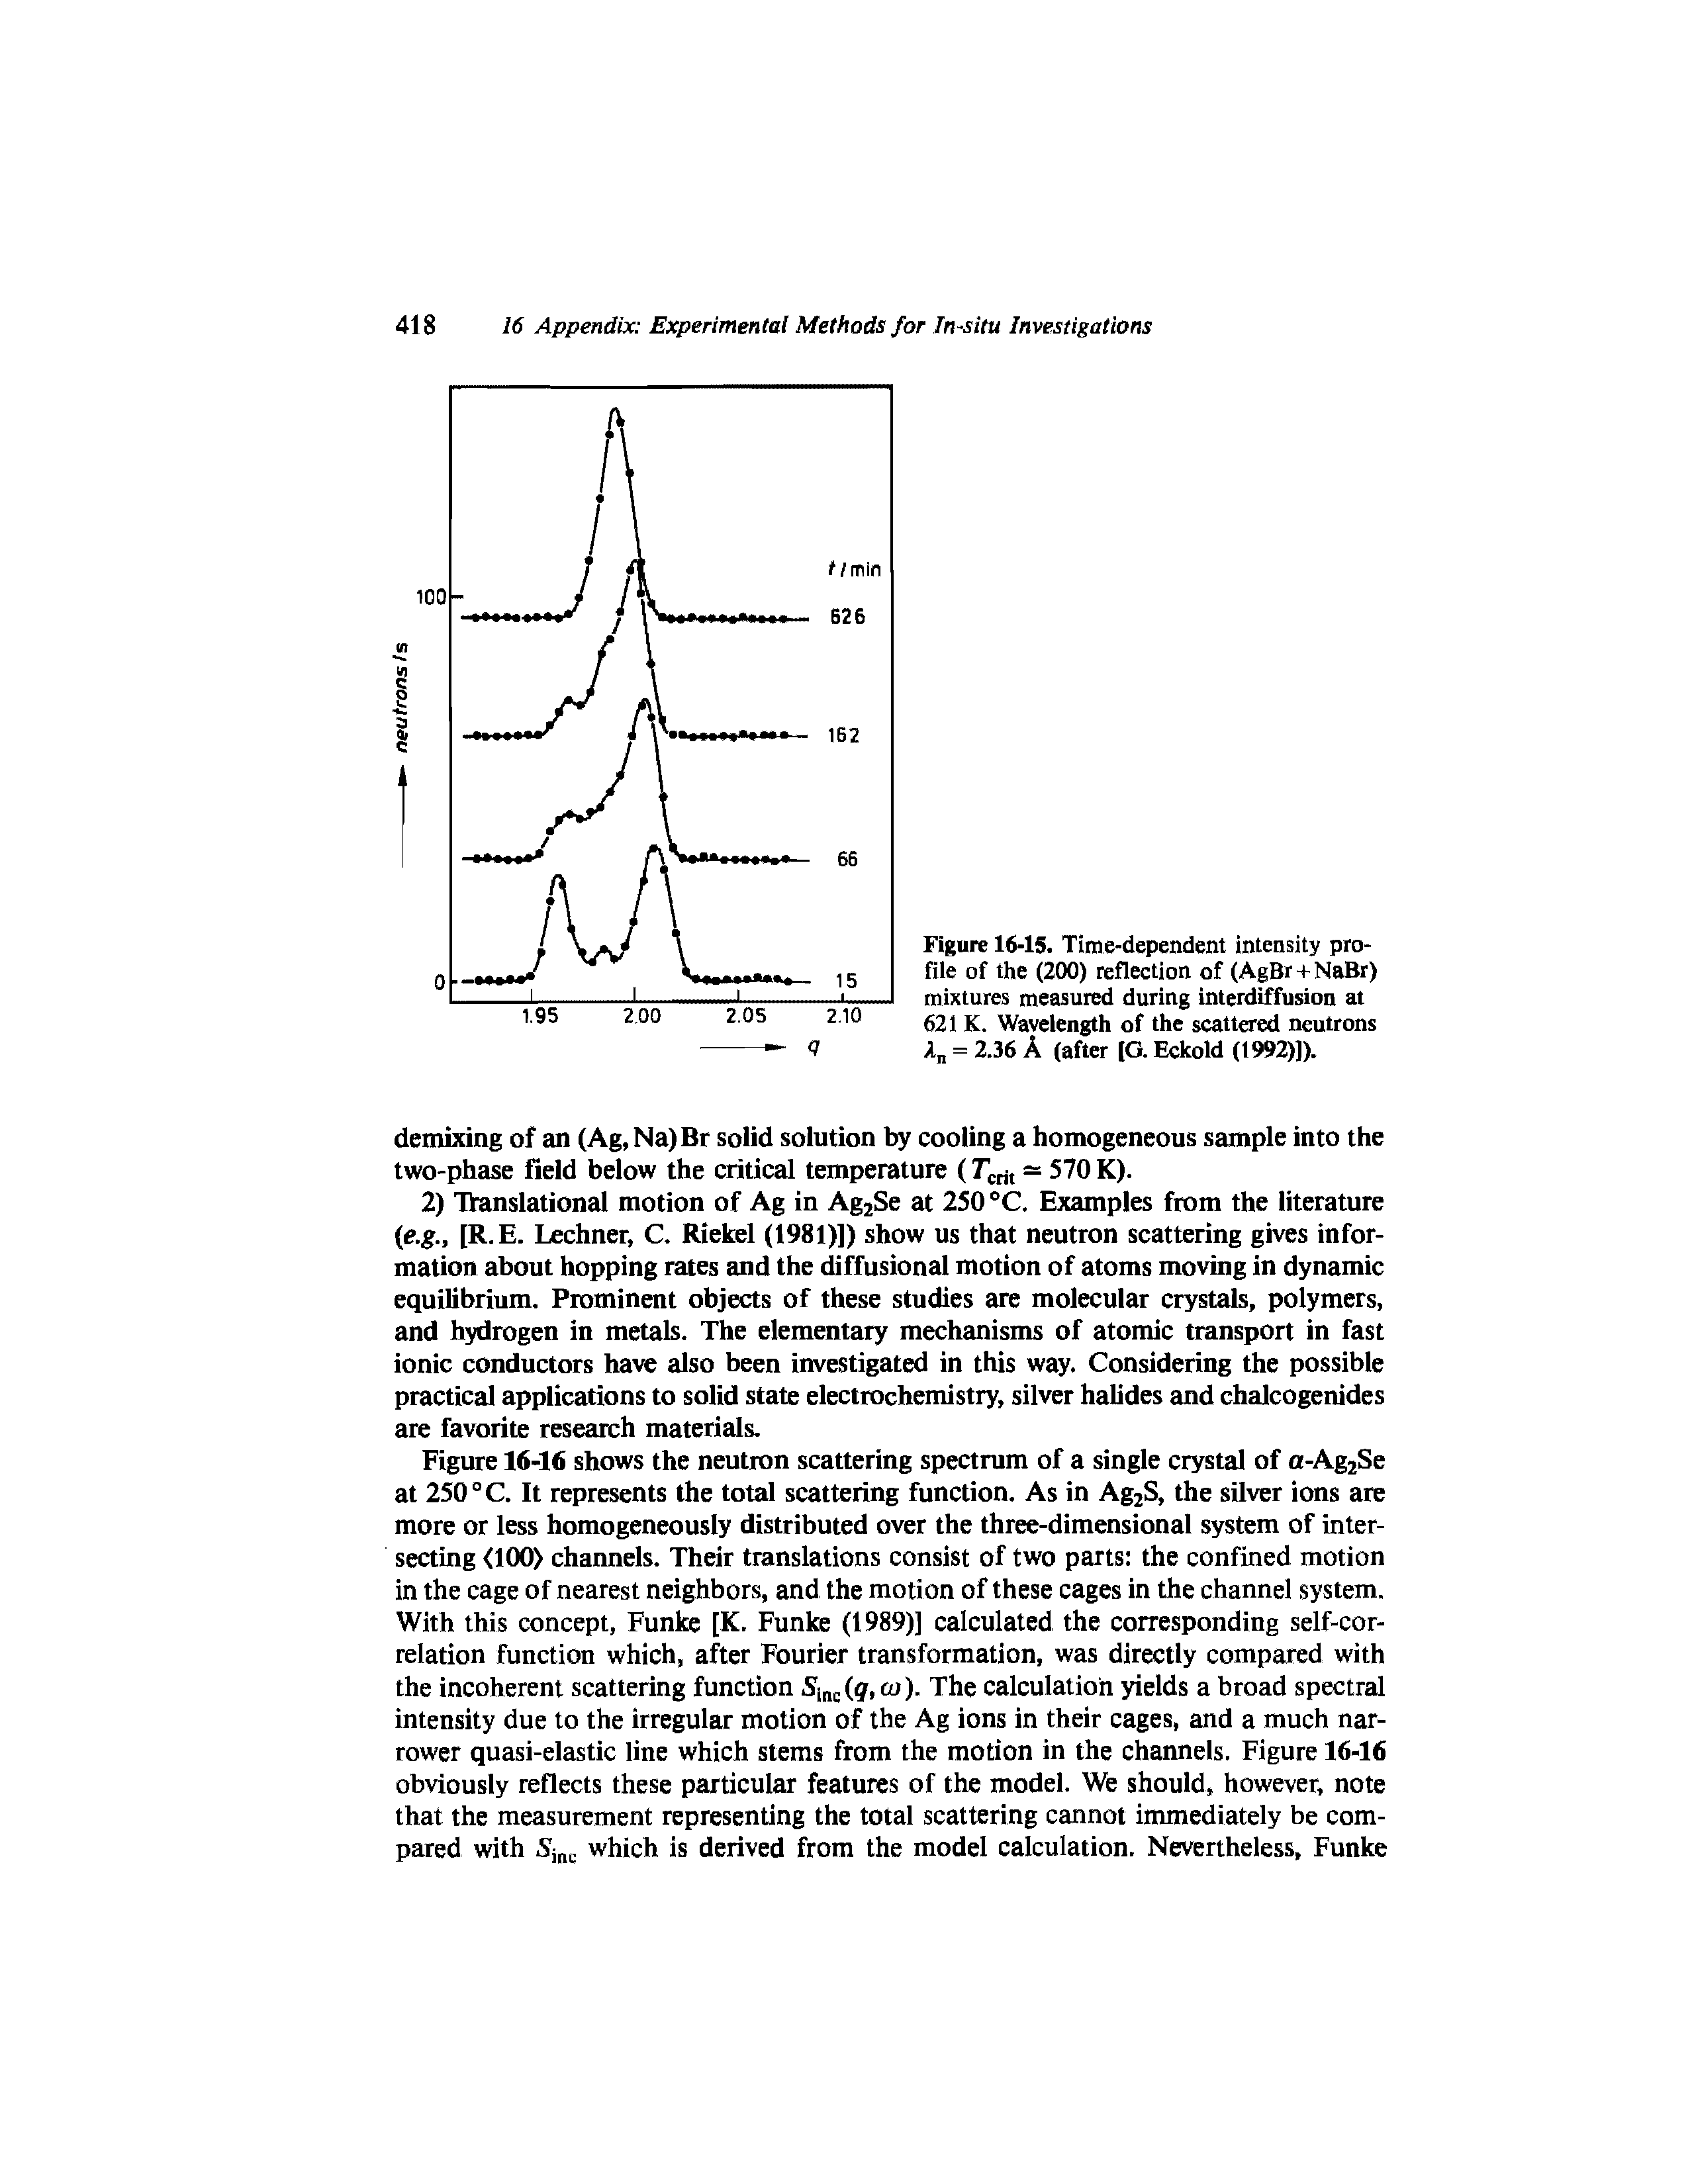 Figure 16-15. Time-dependent intensity profile of the (200) reflection of (AgBr + NaBr) mixtures measured during interdiffusion at 621 K. Wavelength of the scattered neutrons Xn = 2.36 A (after [G. Eckold (1992)]).